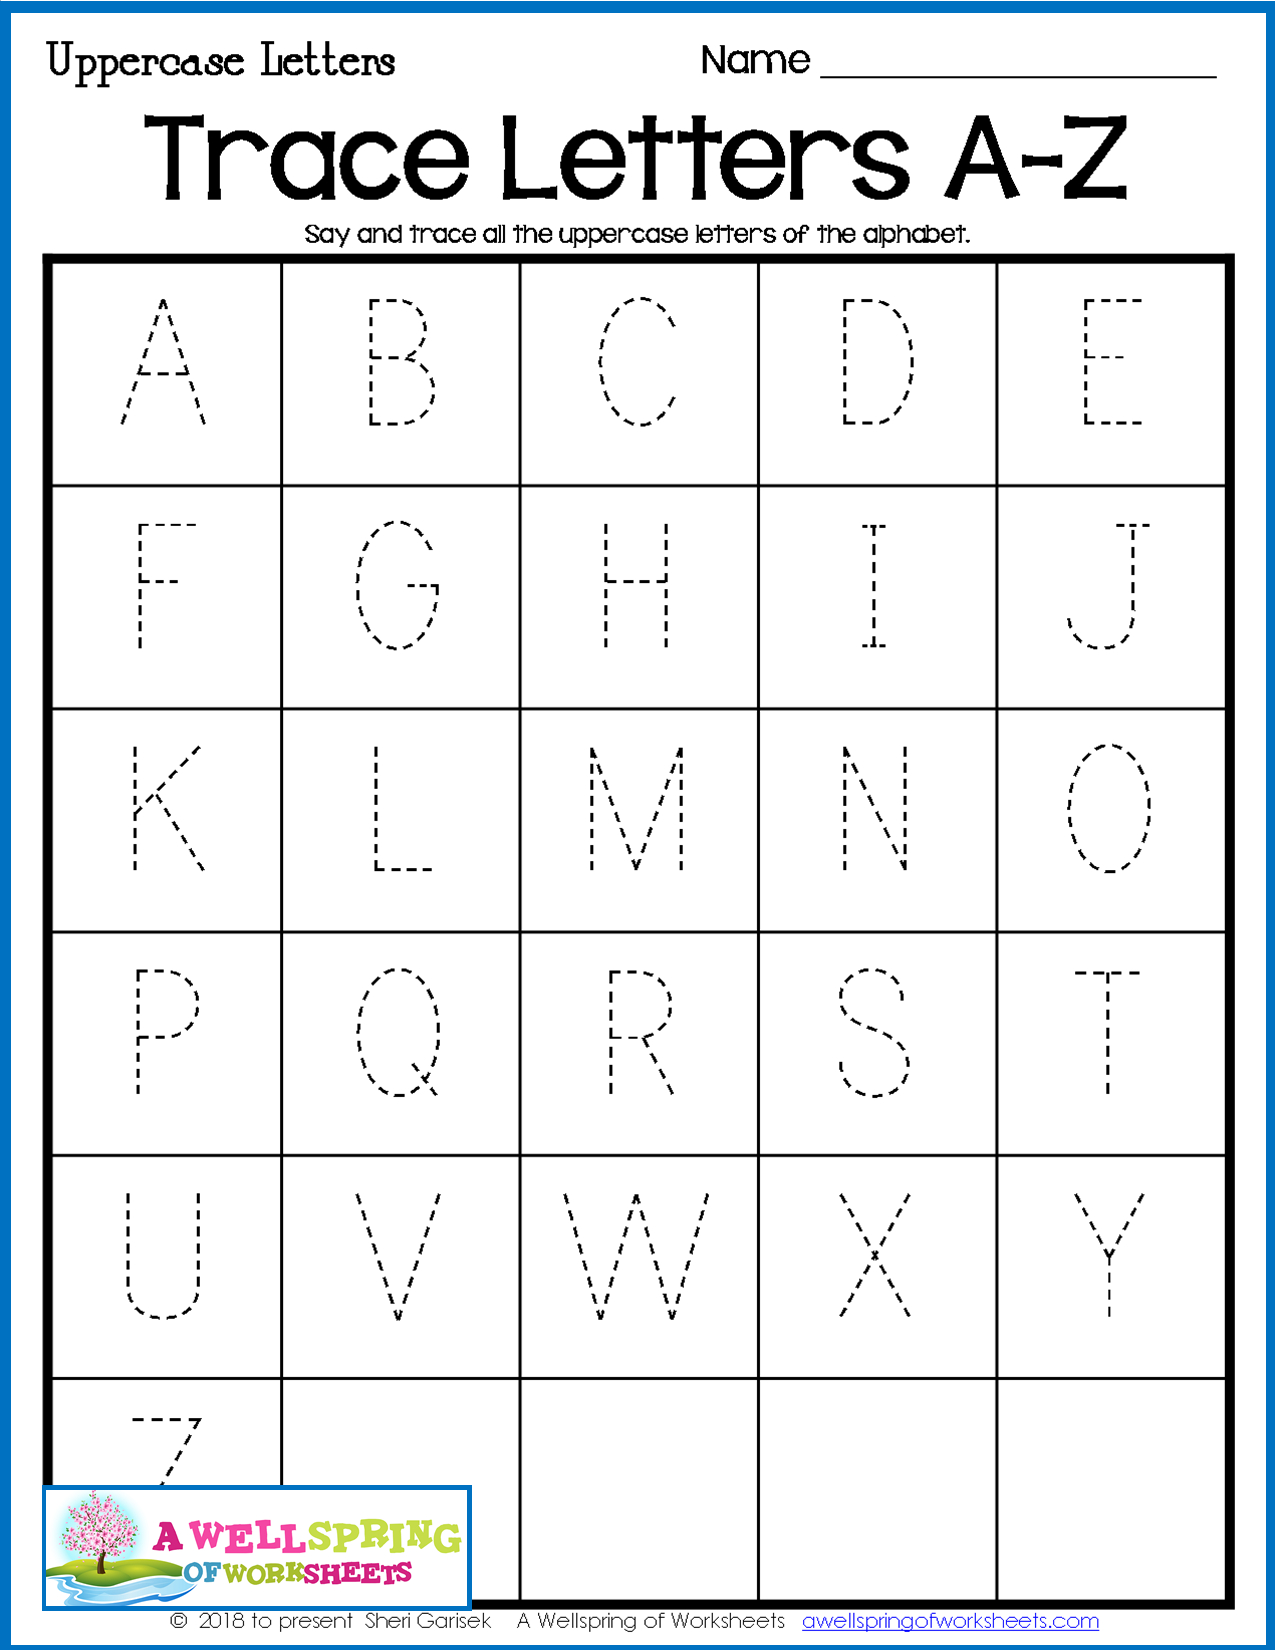 Coloring Book : Alphabetg Worksheets Coloring Book for Uppercase Letters Tracing Free Printables